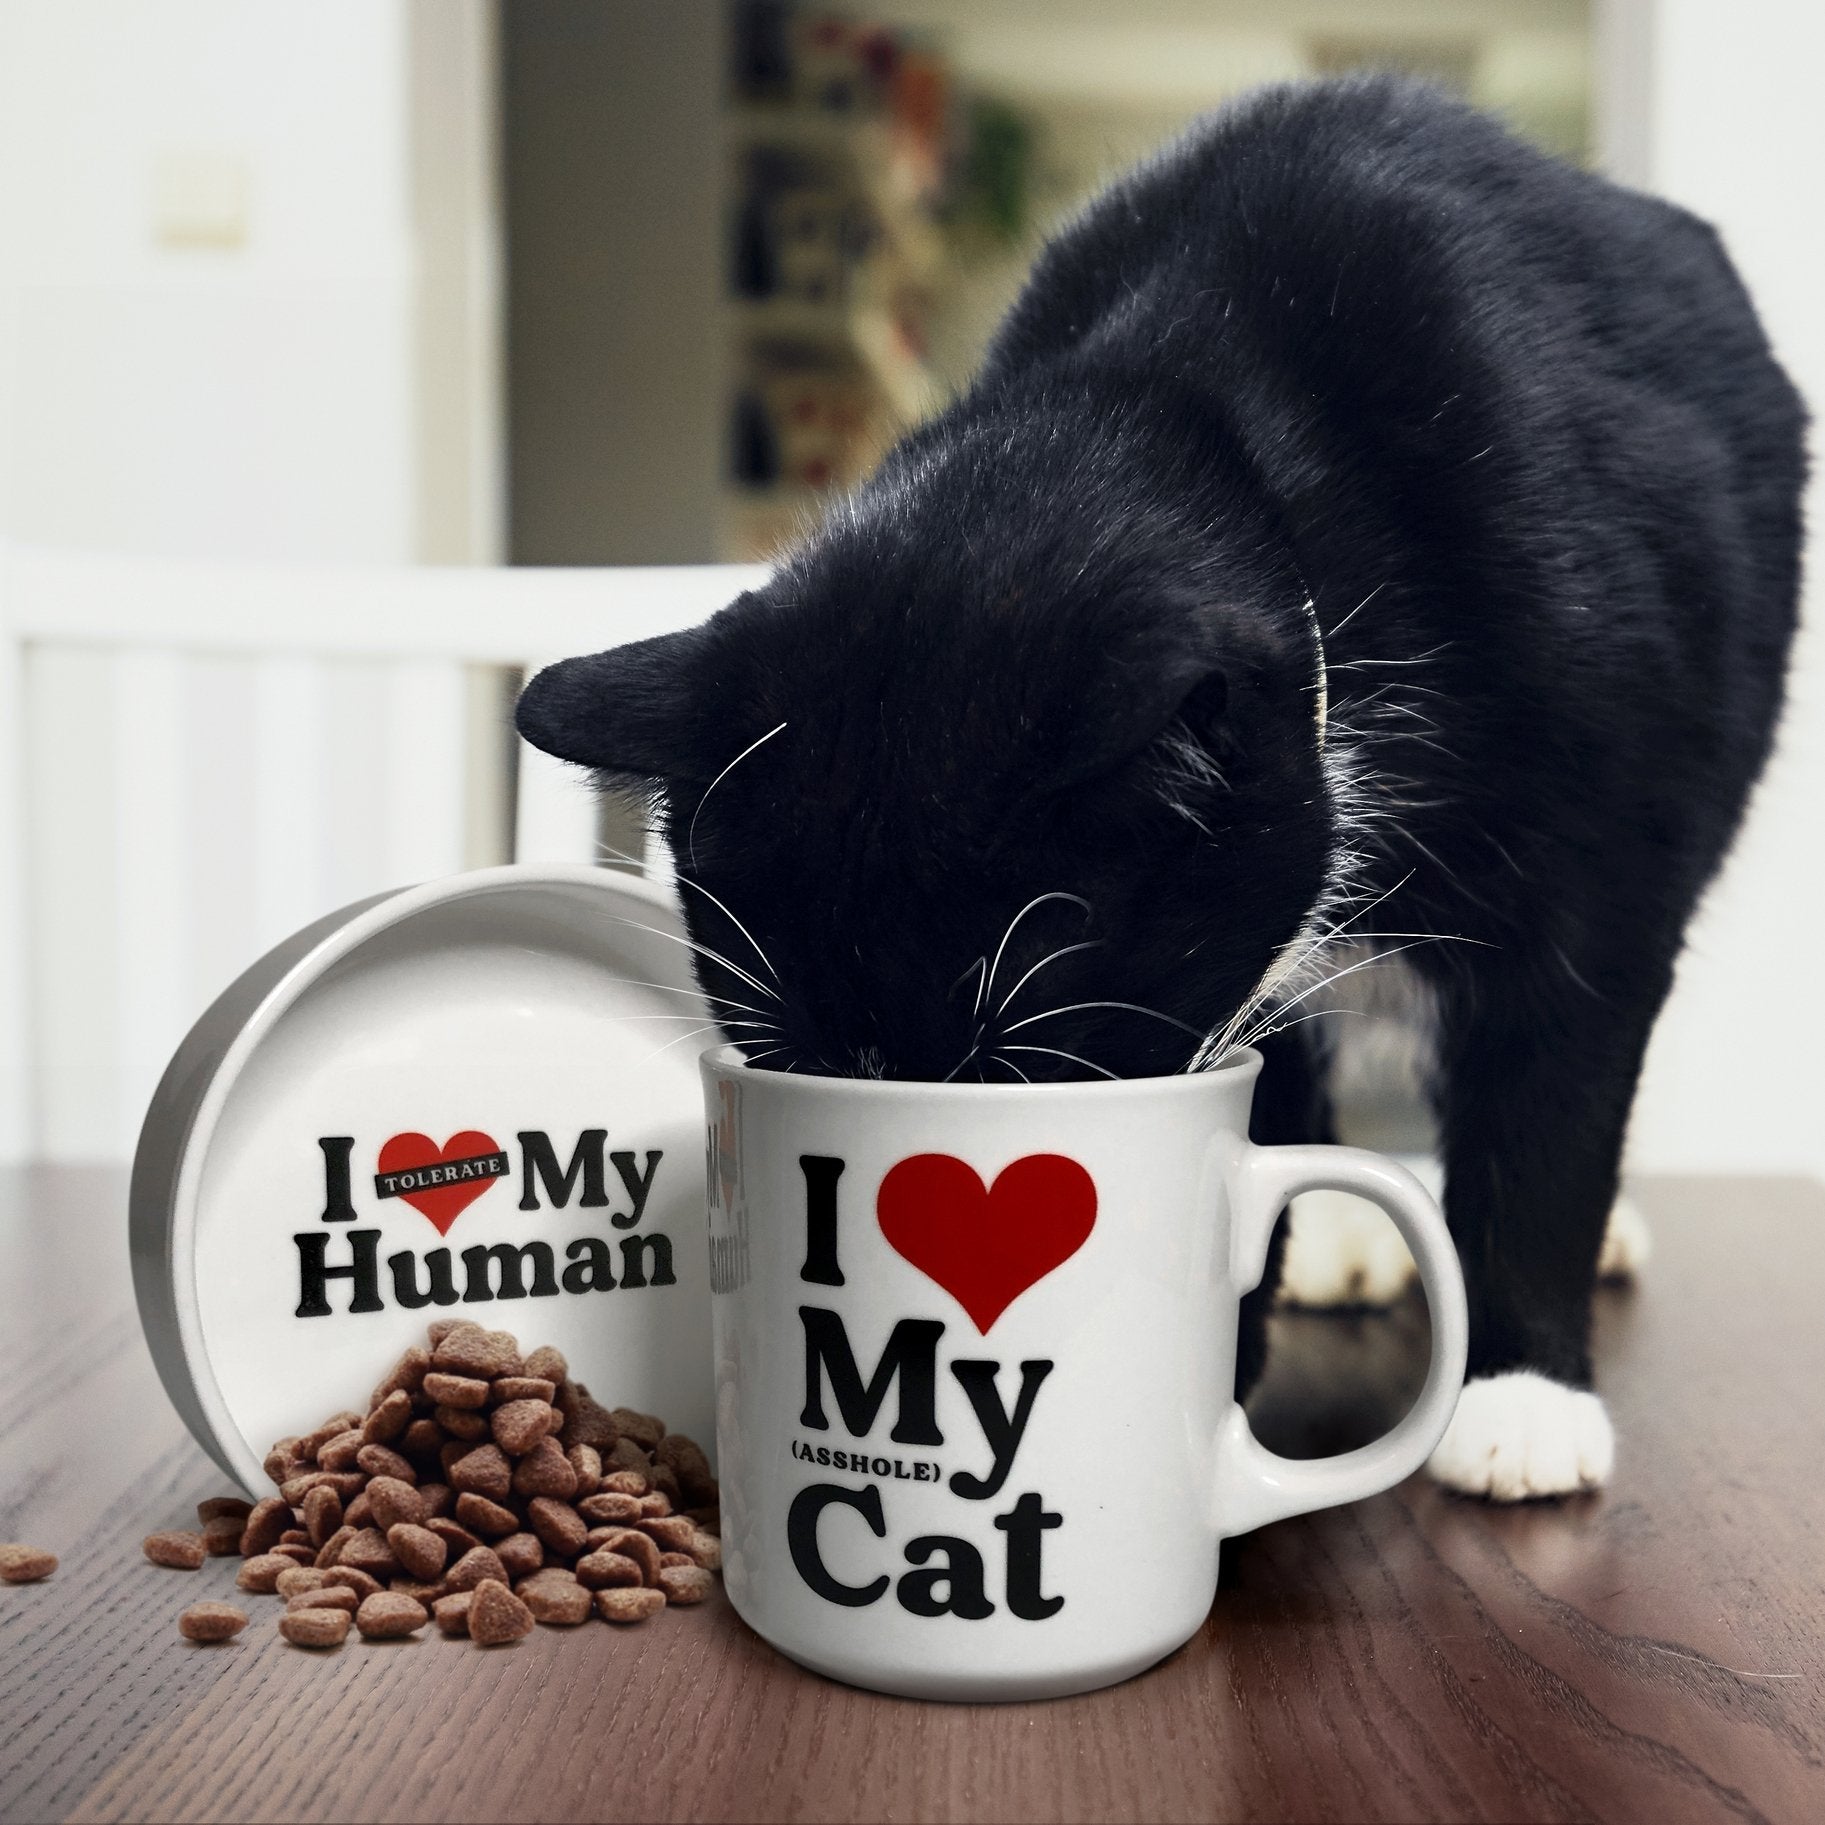 Novelty Gifts For Cat Lovers, I Love My A-hole Cat Coffee Mug, I Tolerate My Human Cat Food Bowl